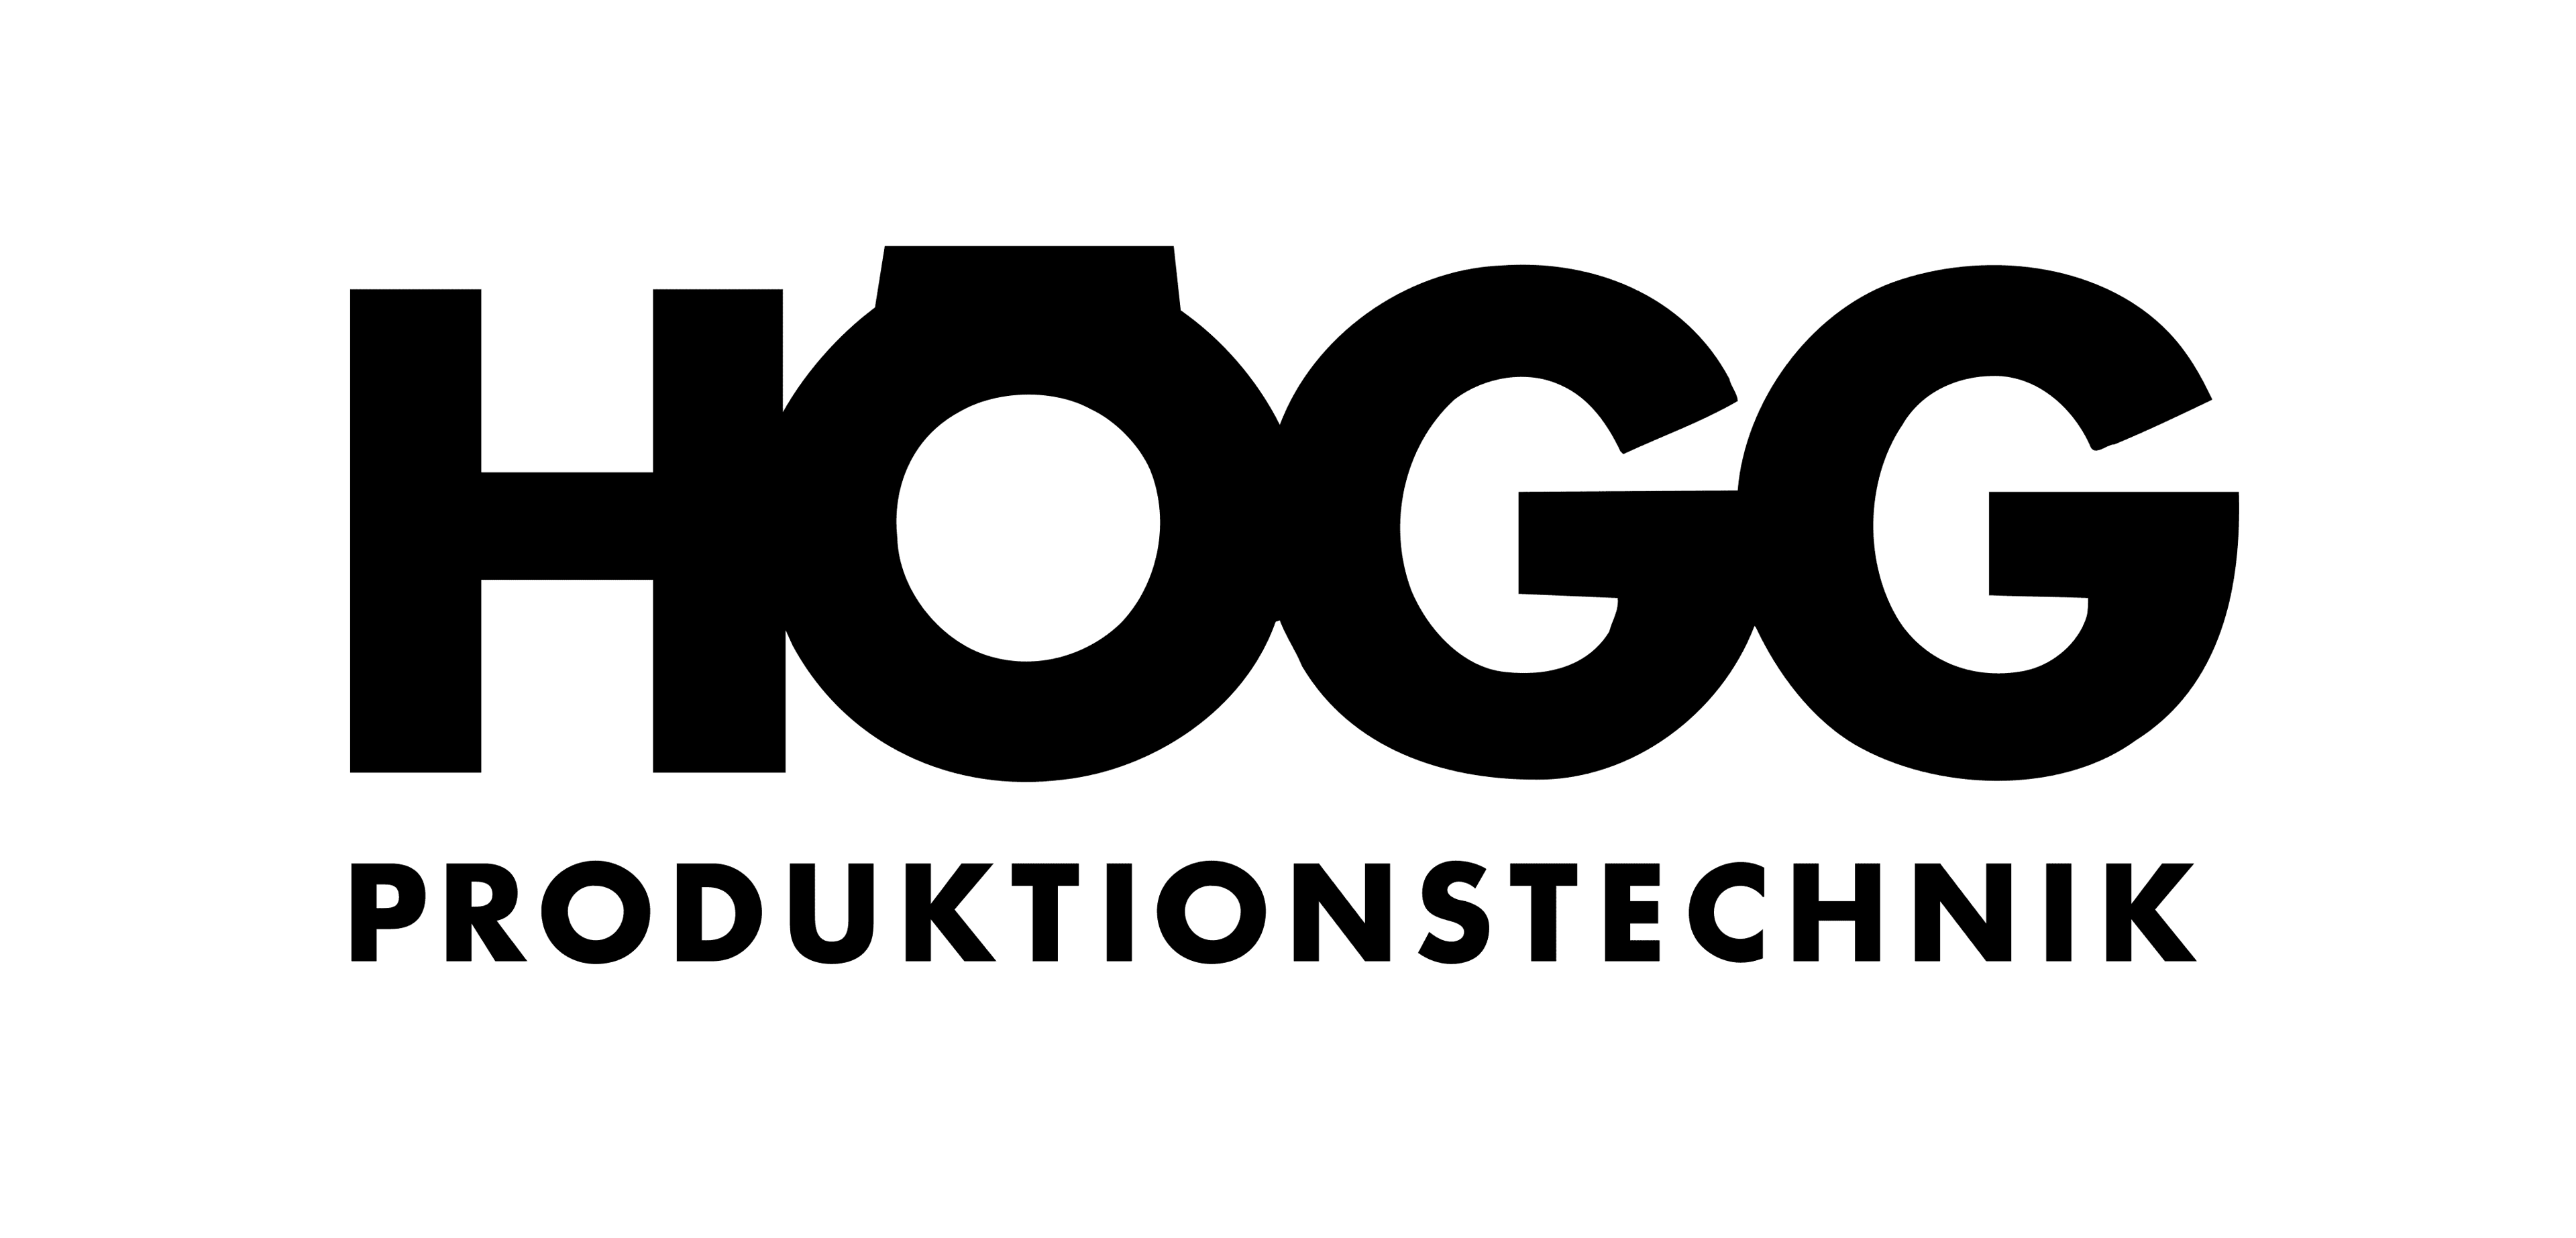 The logo of Högg AG. They are sponsor of amz racing.